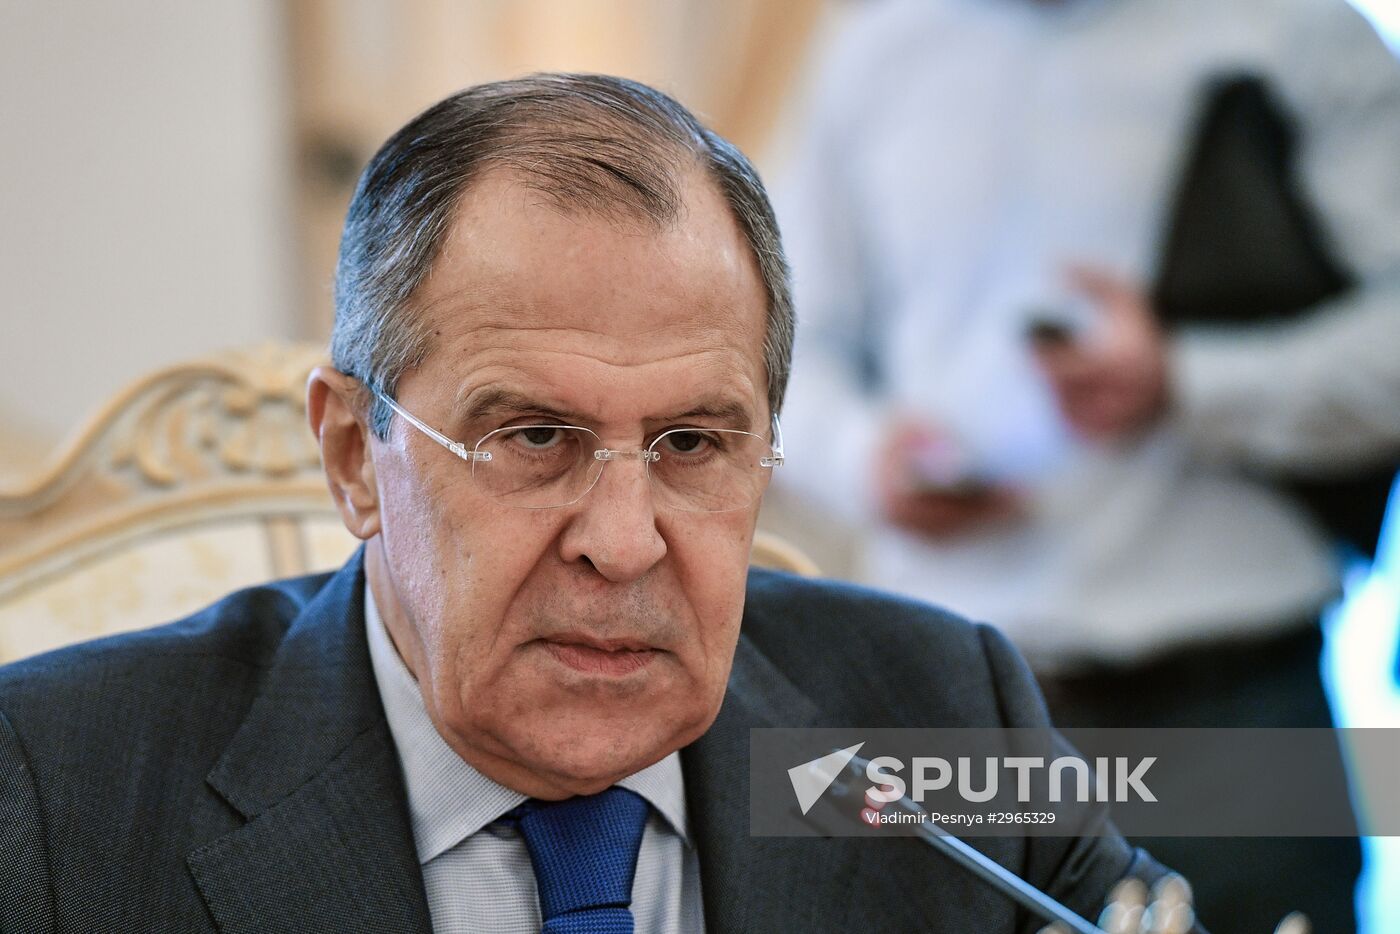 Russian Foreign Minister Sergei Lavrov meets with his Cypriot counterpart Ioannis Kasoulides